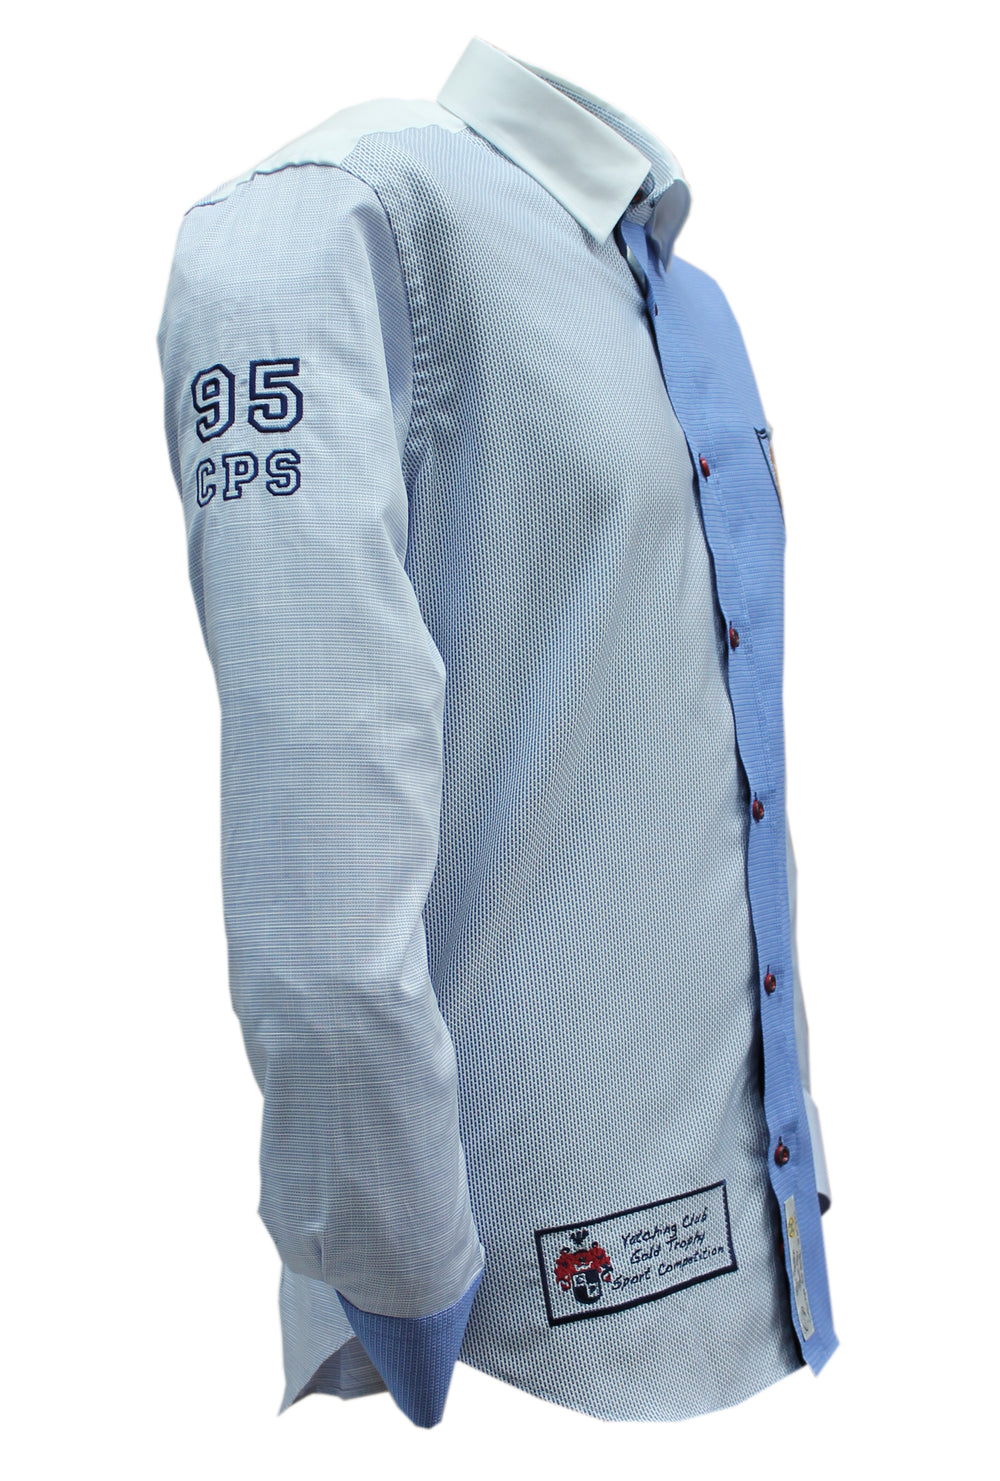 Embroidered multi blue chic sport shirt